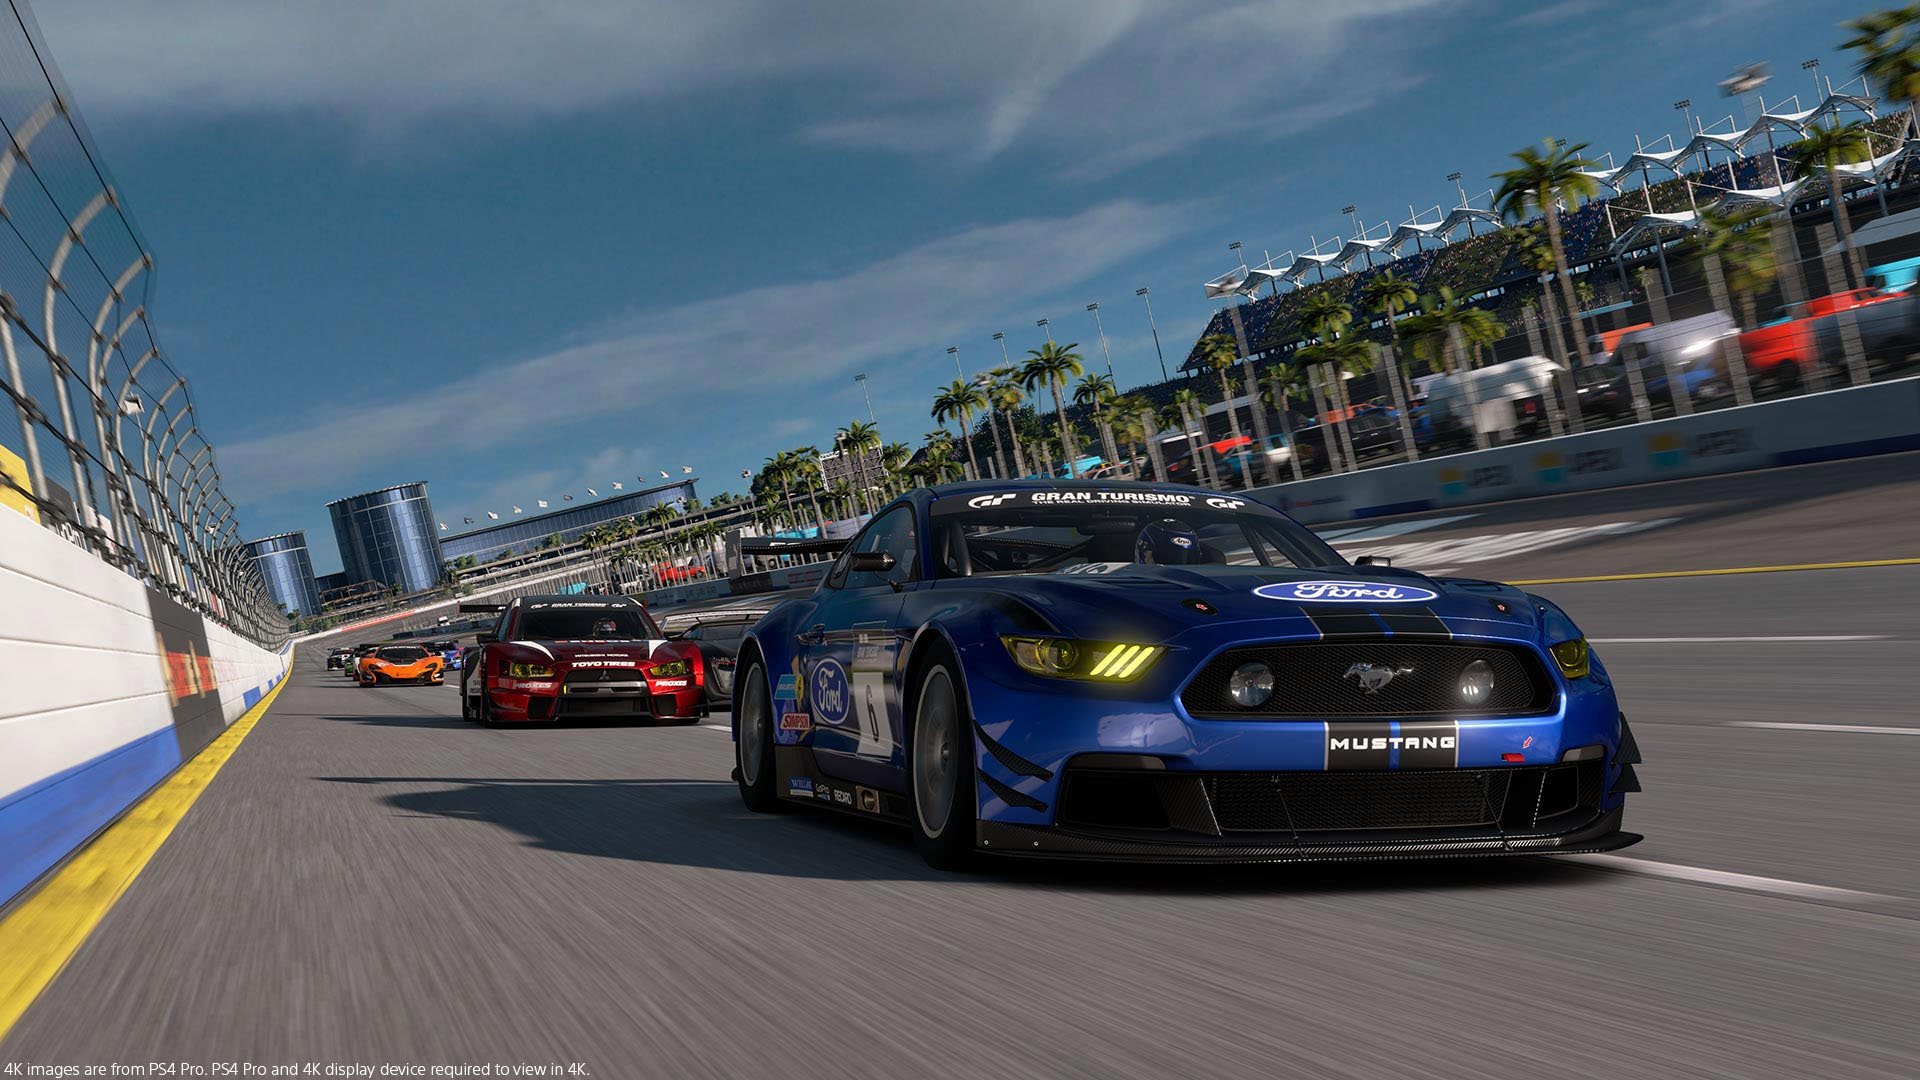 GT7 looks awful, this looks like it's running on OG PS4 : r/gaming